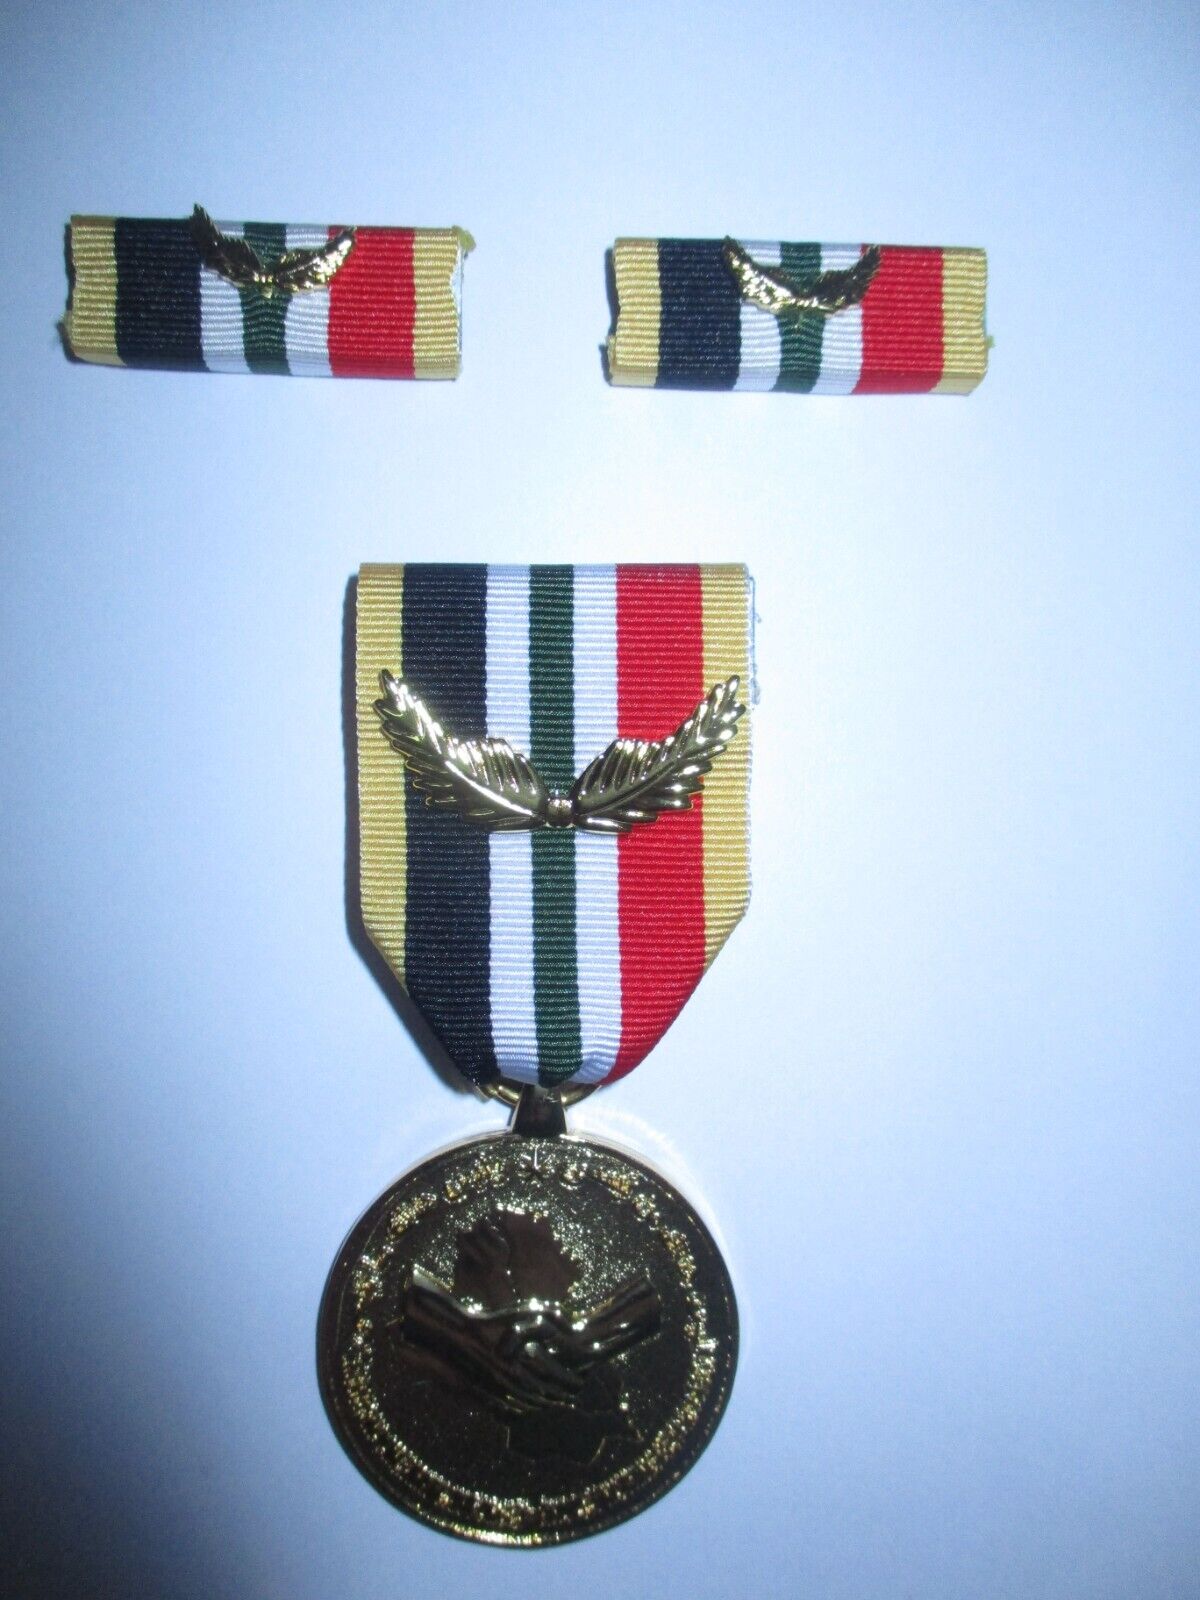 IRAQ COMMITMENT MEDAL WITH TWO SERVICE RIBBONS (MILITARY VERSION)